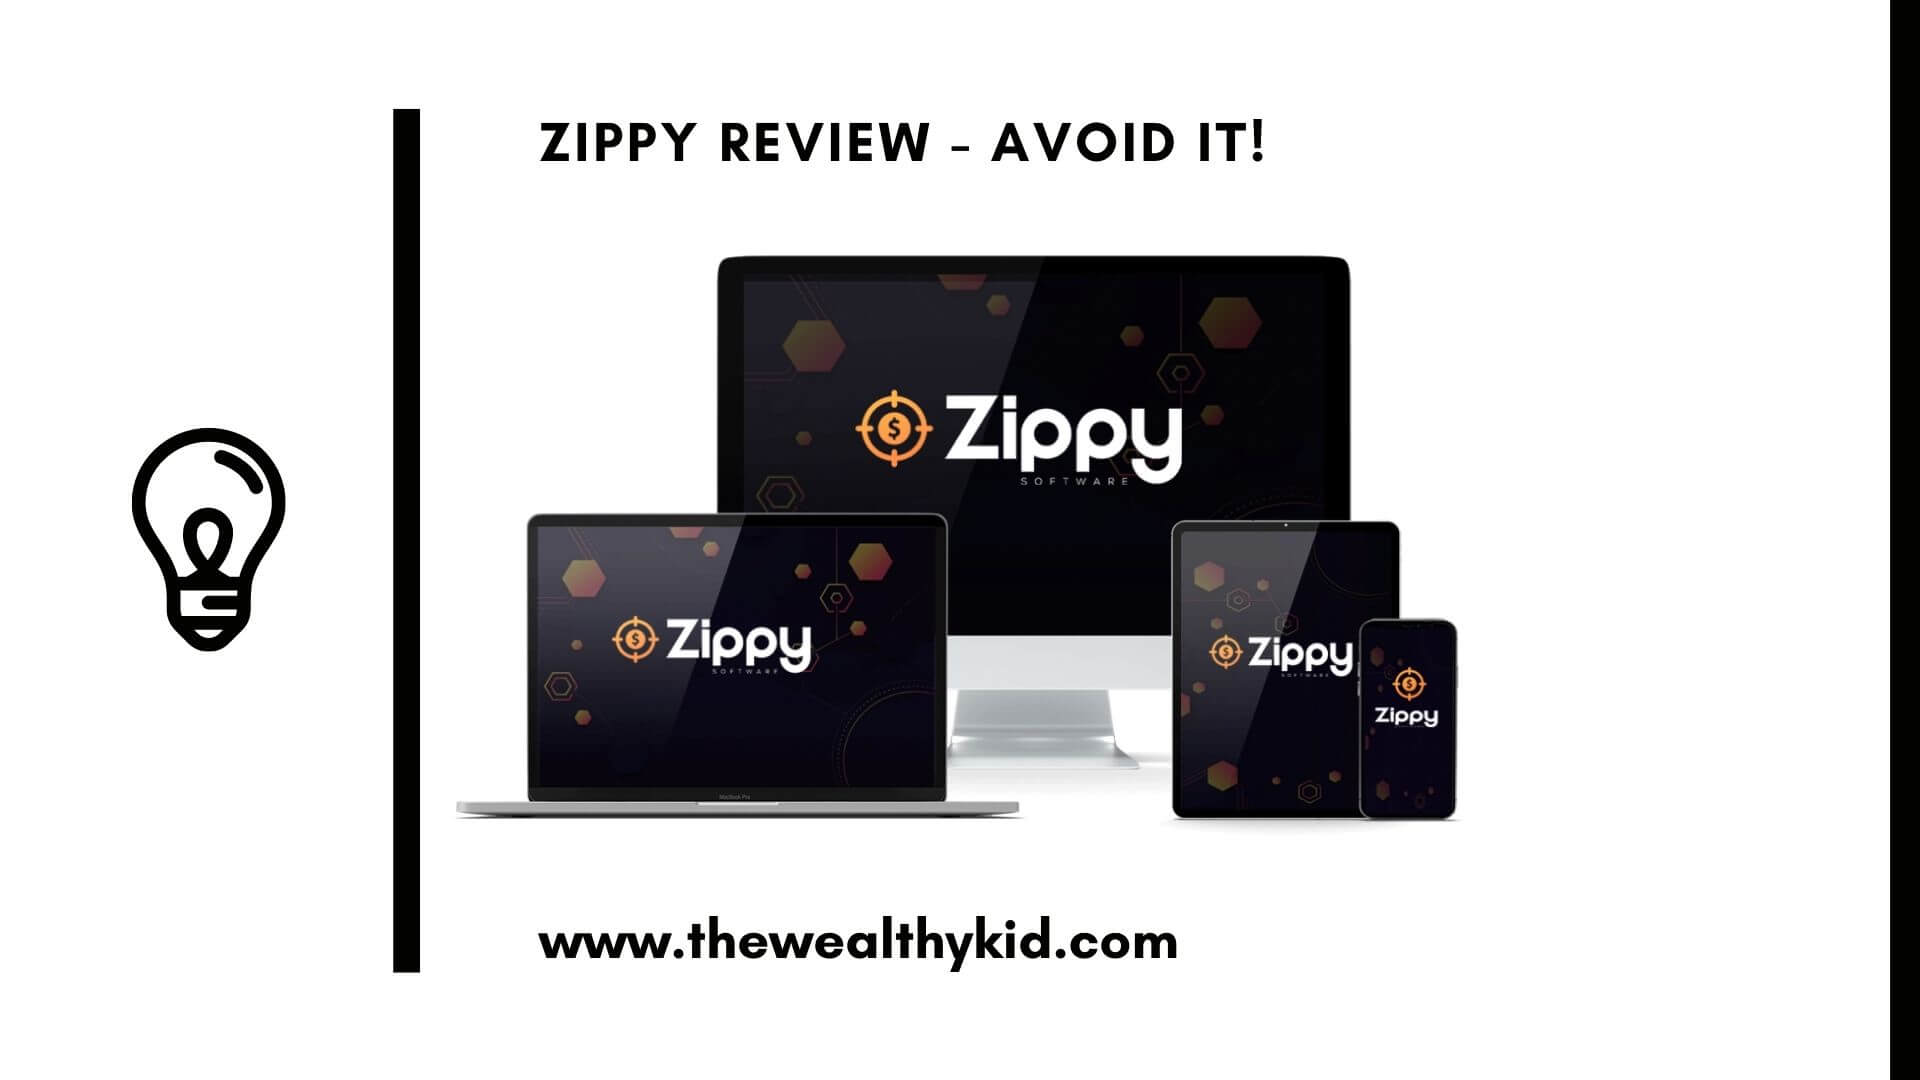 what is Zippy Software all about